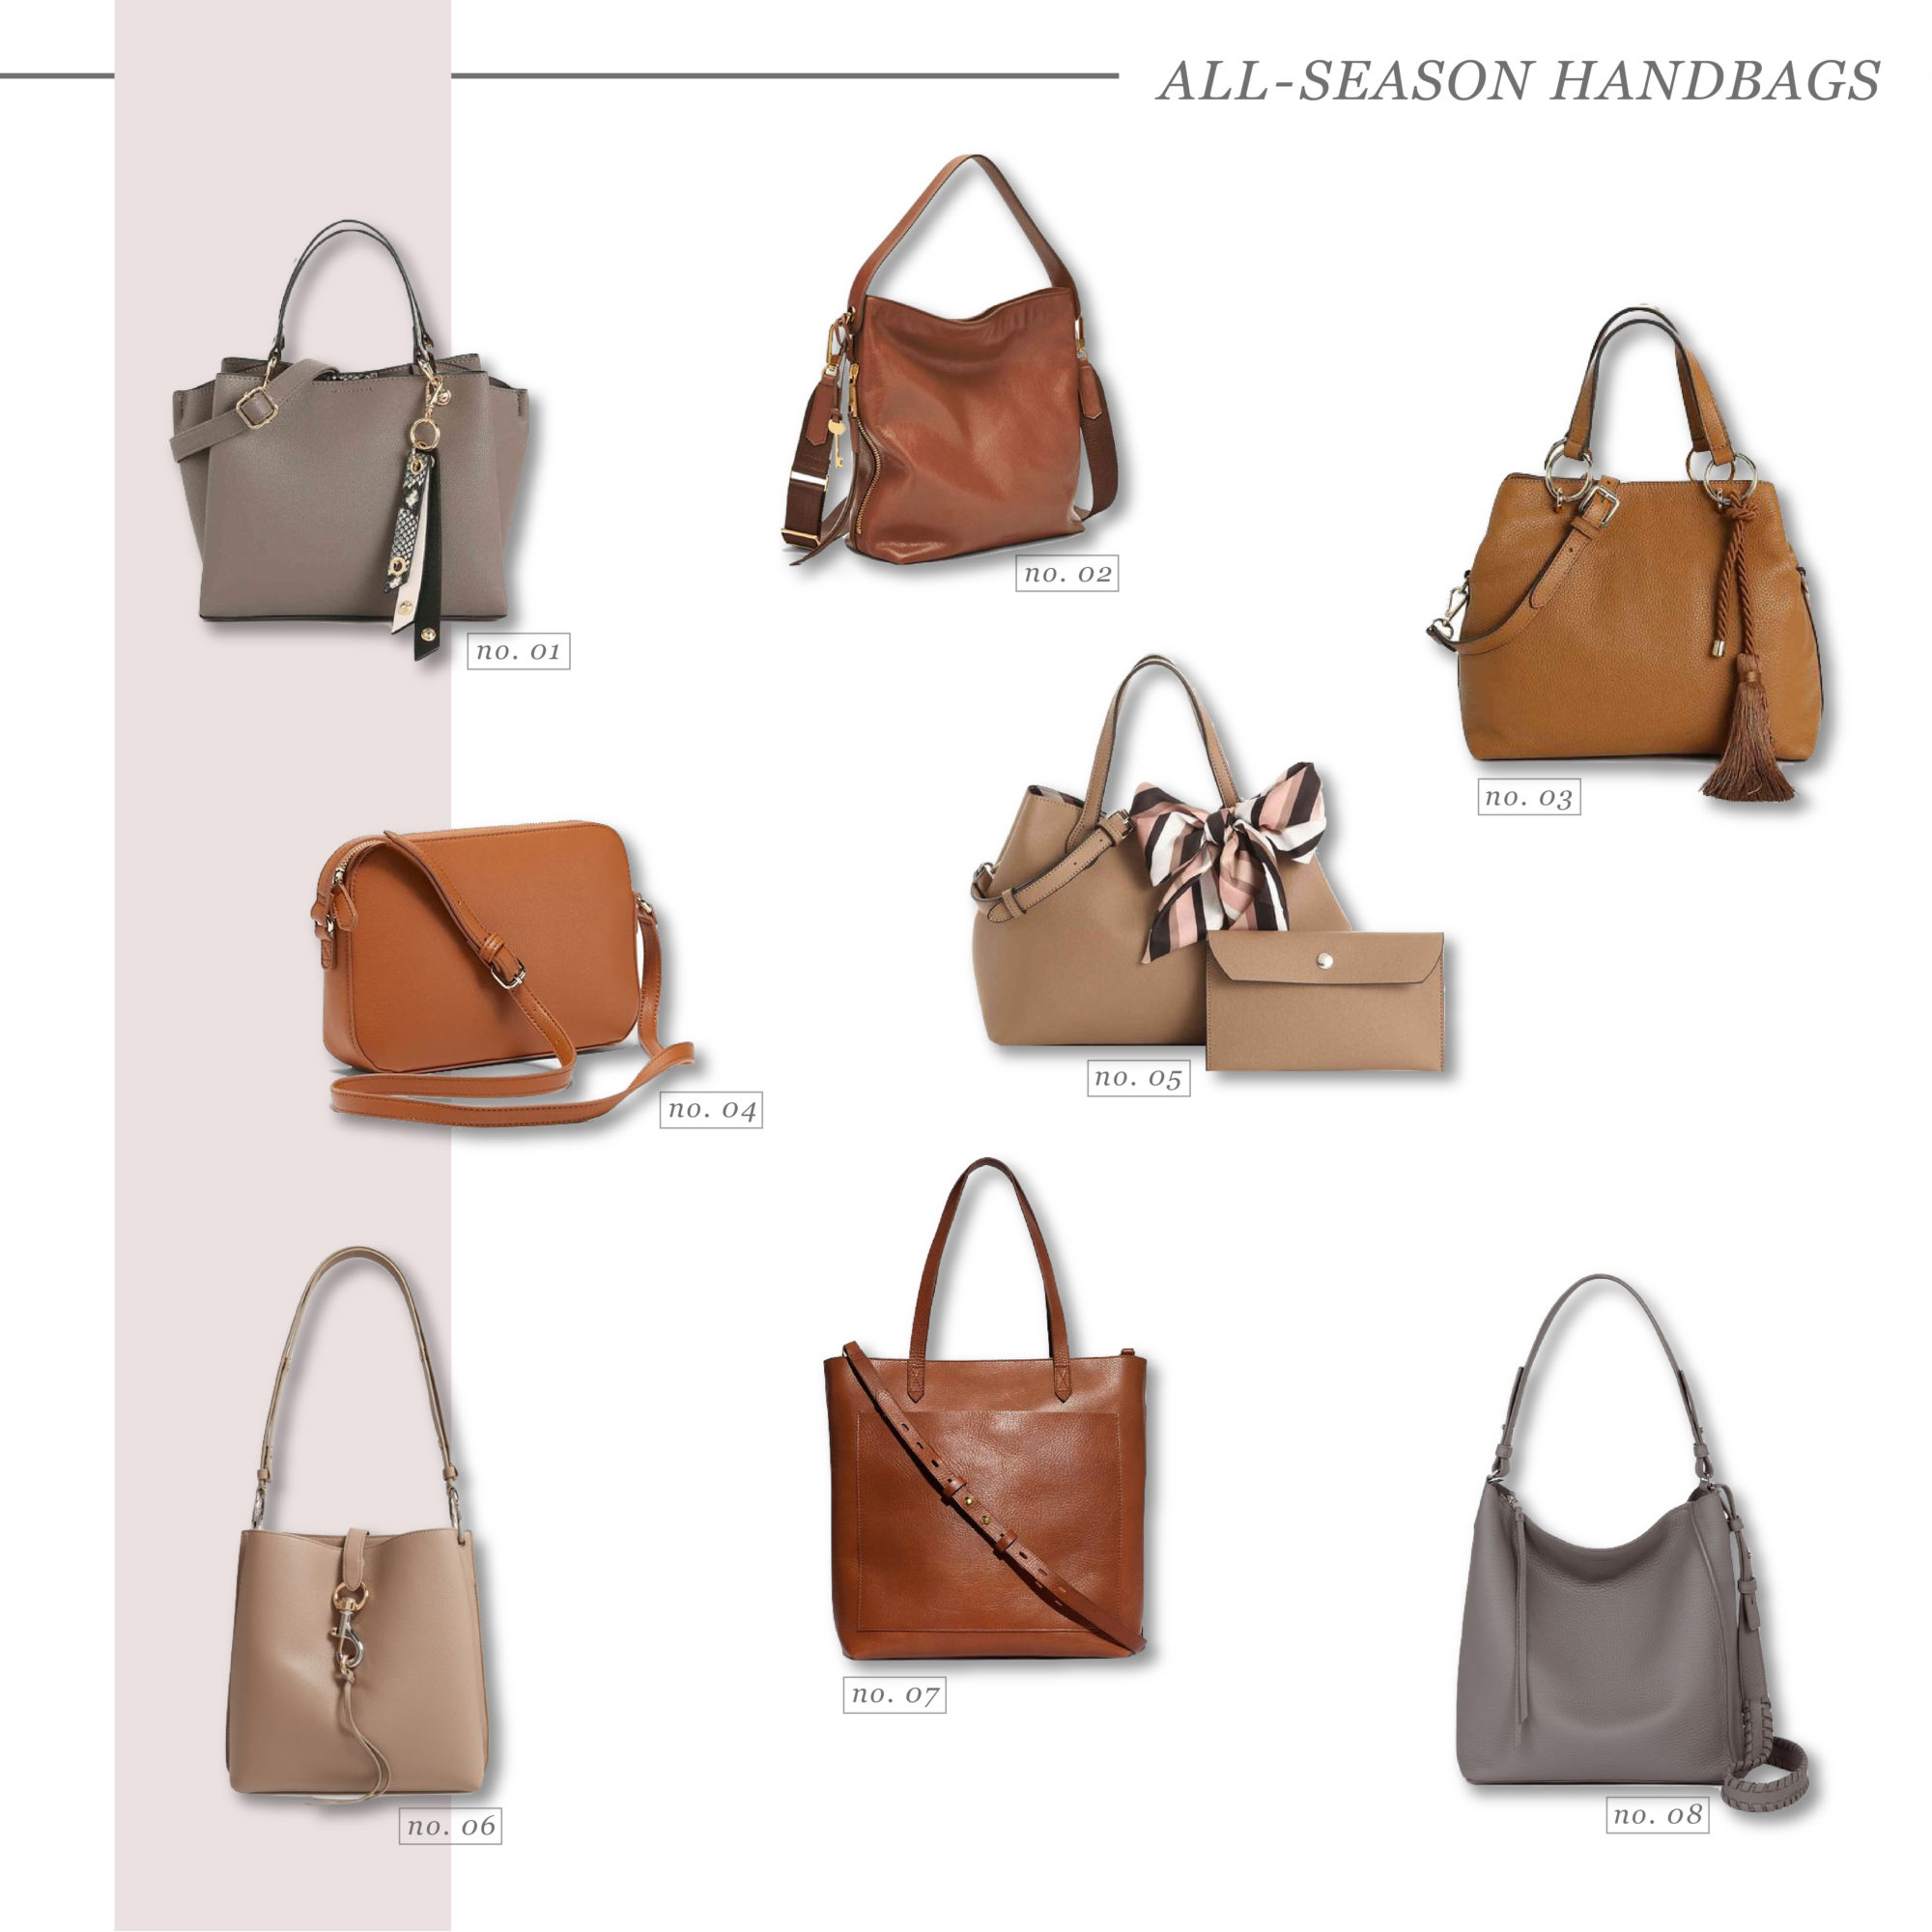 Classic Bags for Any Season